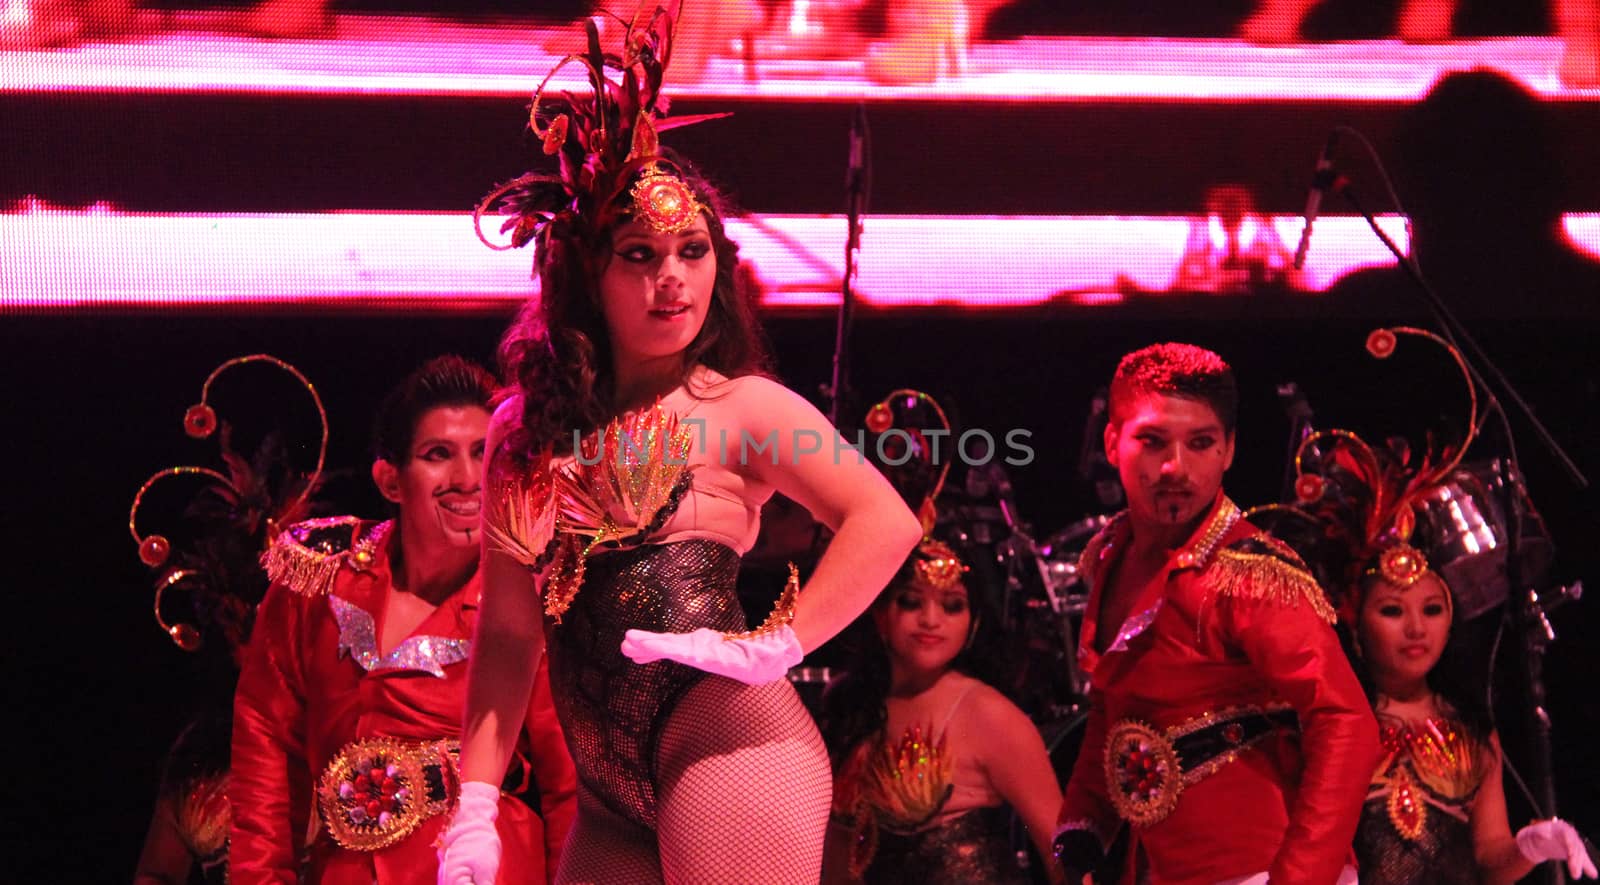 Entertainers performing on stage at a carnaval in Playa del Carmen, Mexico
08 Mar 2014
No model release
Editorial only